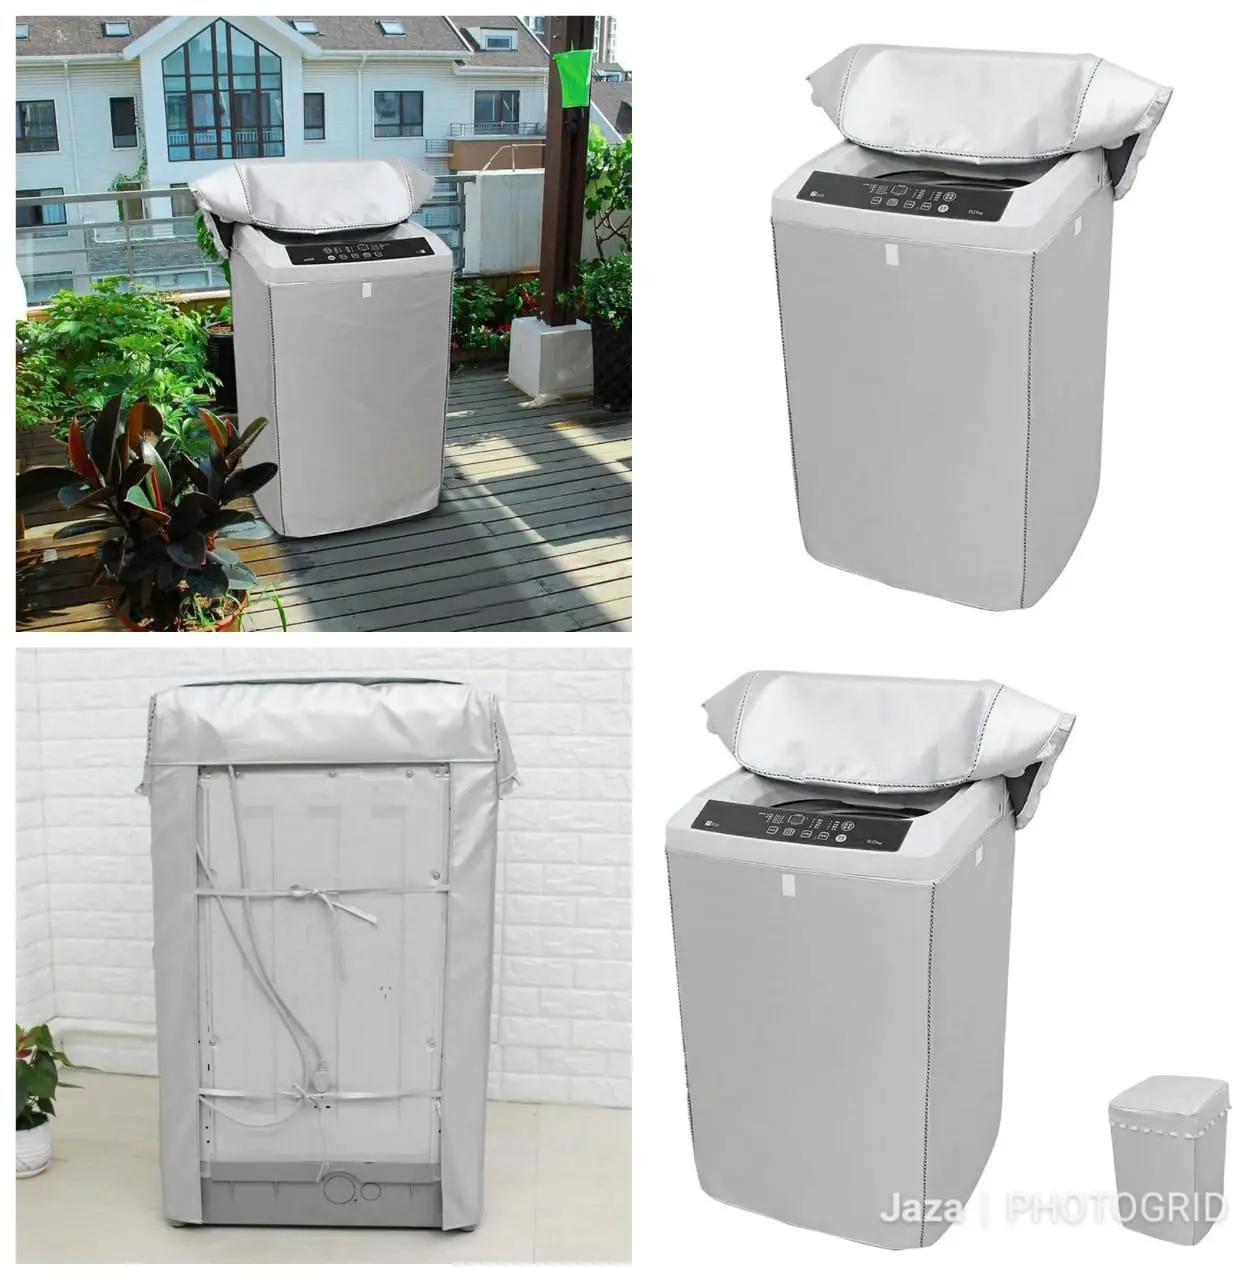 Top load washing machine covers; Home & Living